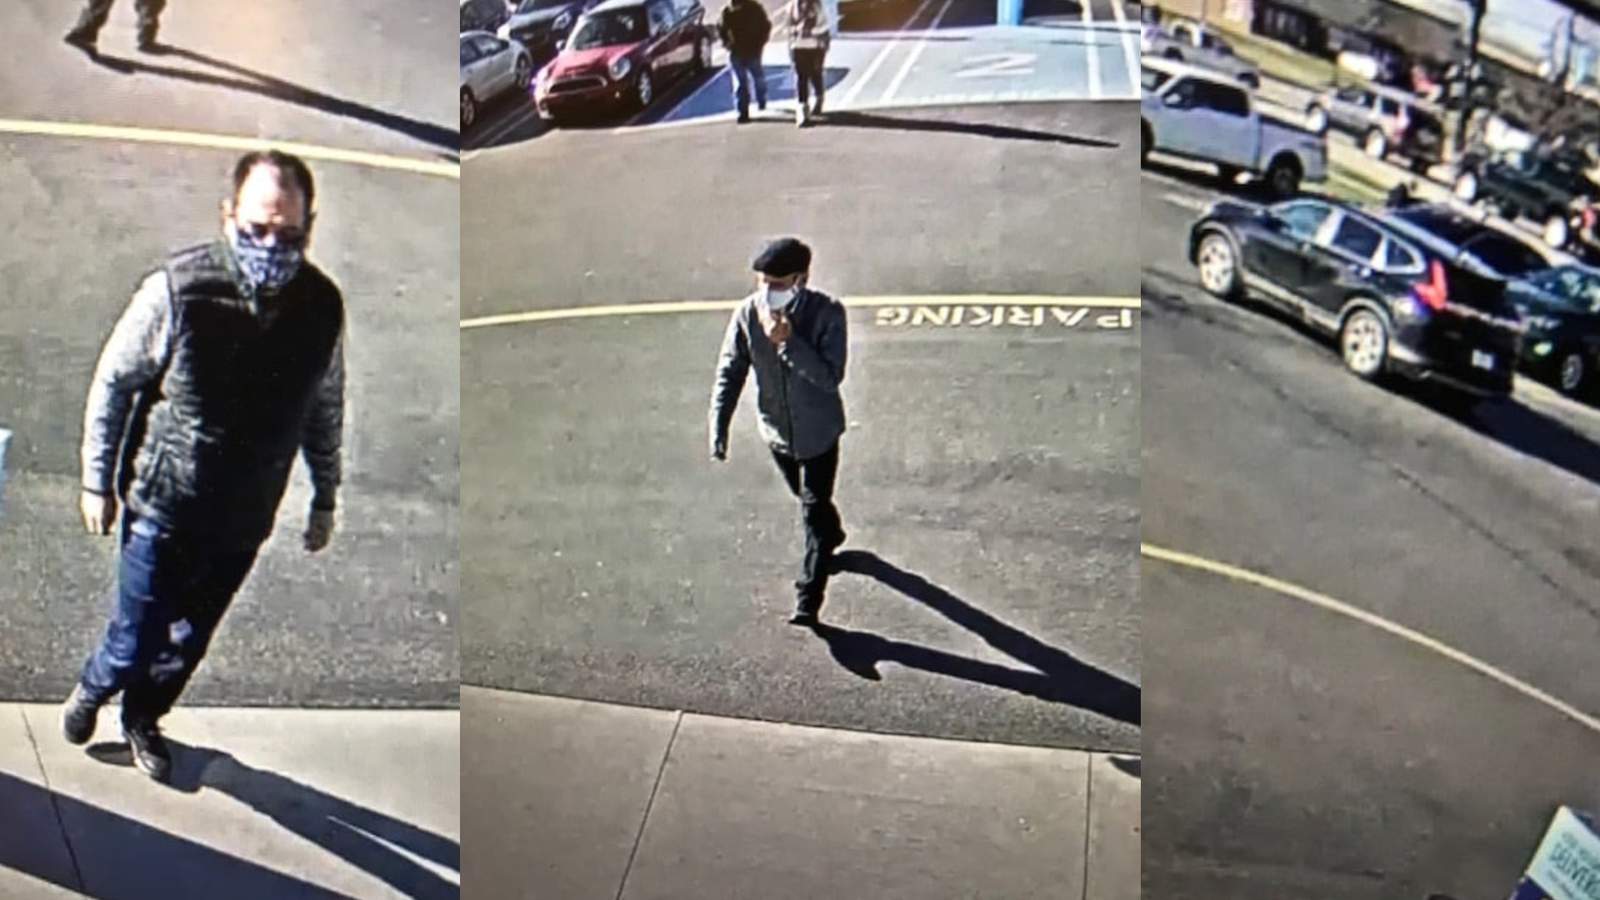 Van Buren Township police looking for 2 men accused of stealing wallet from woman shopping alone